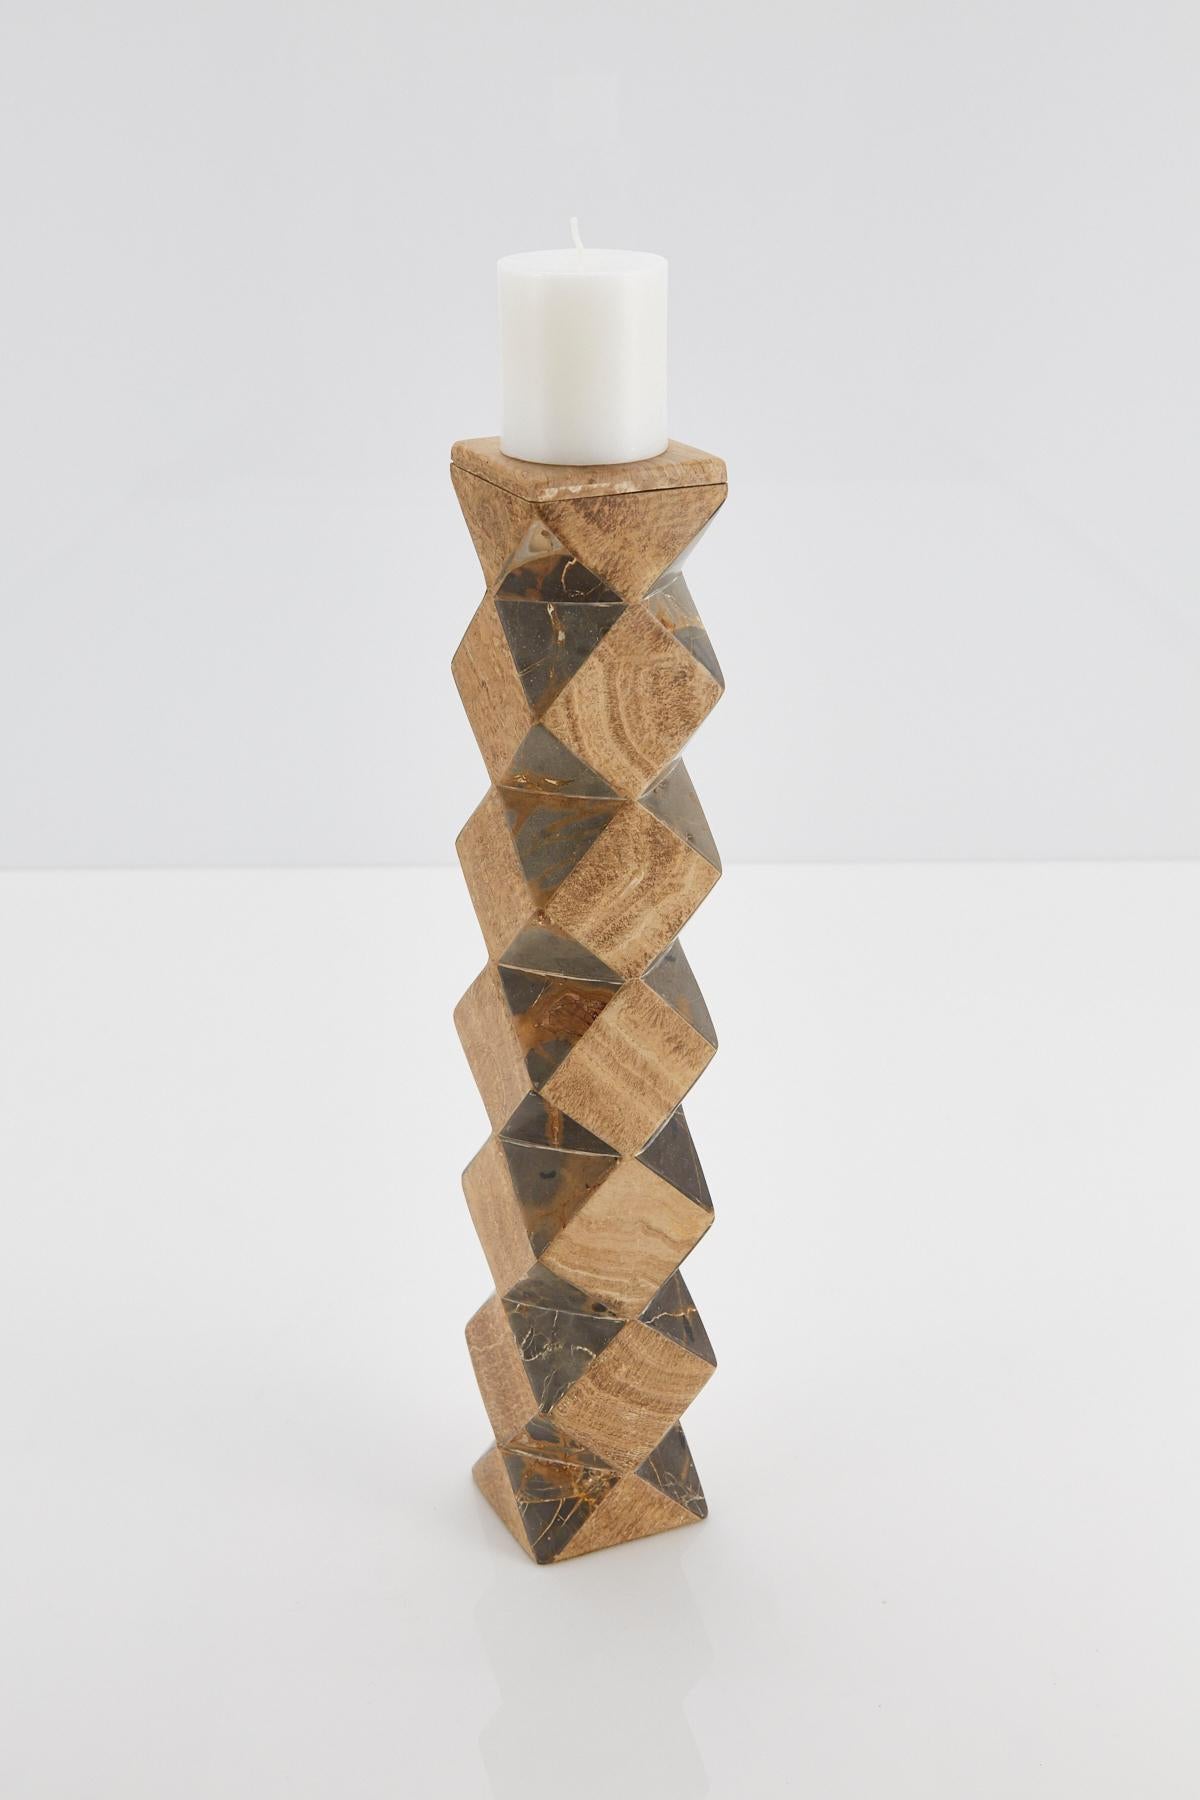 Philippine Tall Convertible Faceted Postmodern Tessellated Stone Candlestick or Vase, 1990s For Sale